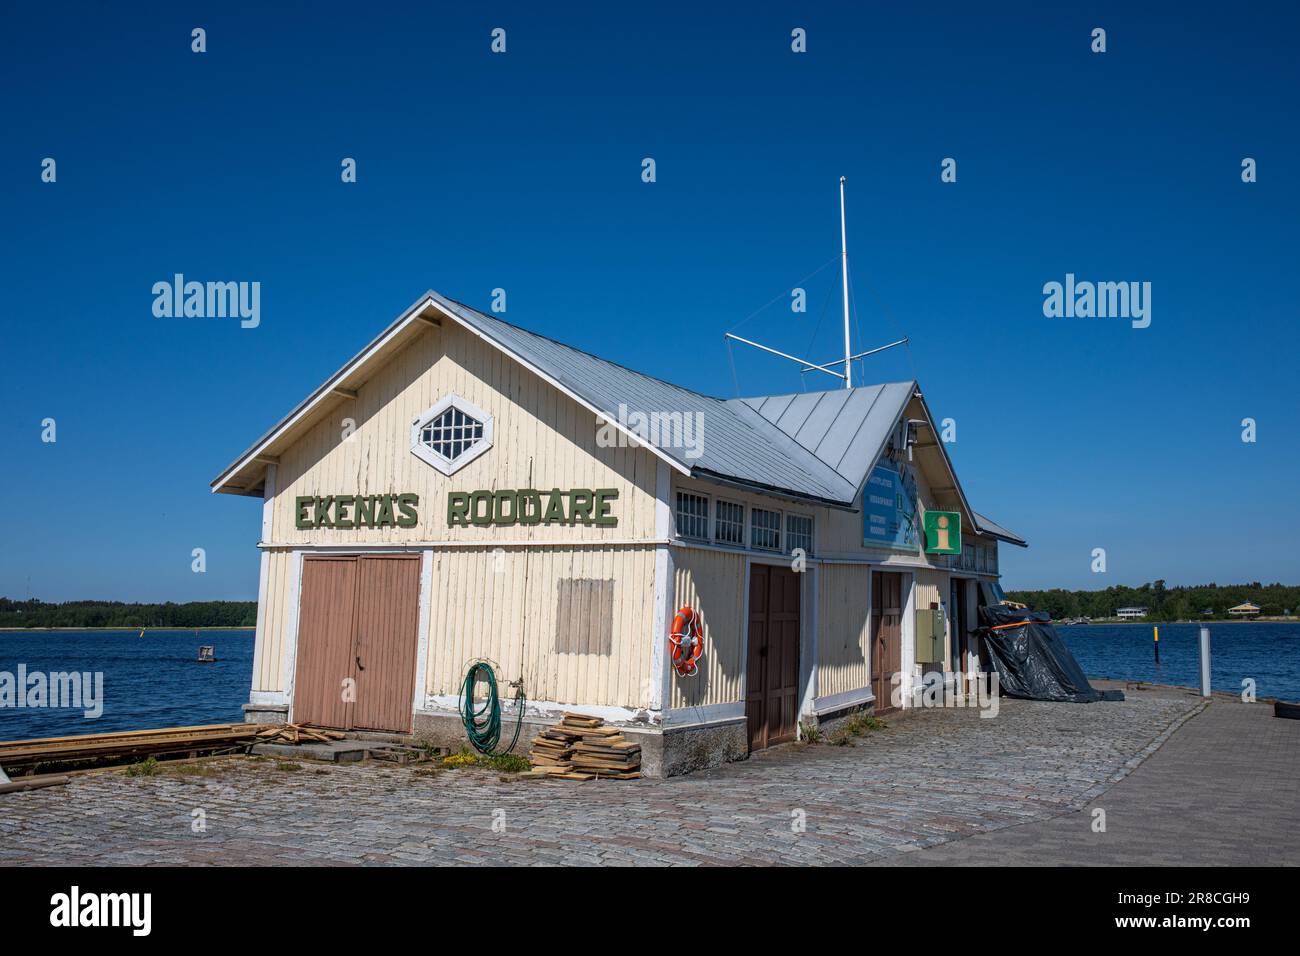 Derelict wooden storage building or boathouse of Ekenäs Roddare rowing club against clear blue sky in Tammisaari, Finland Stock Photo